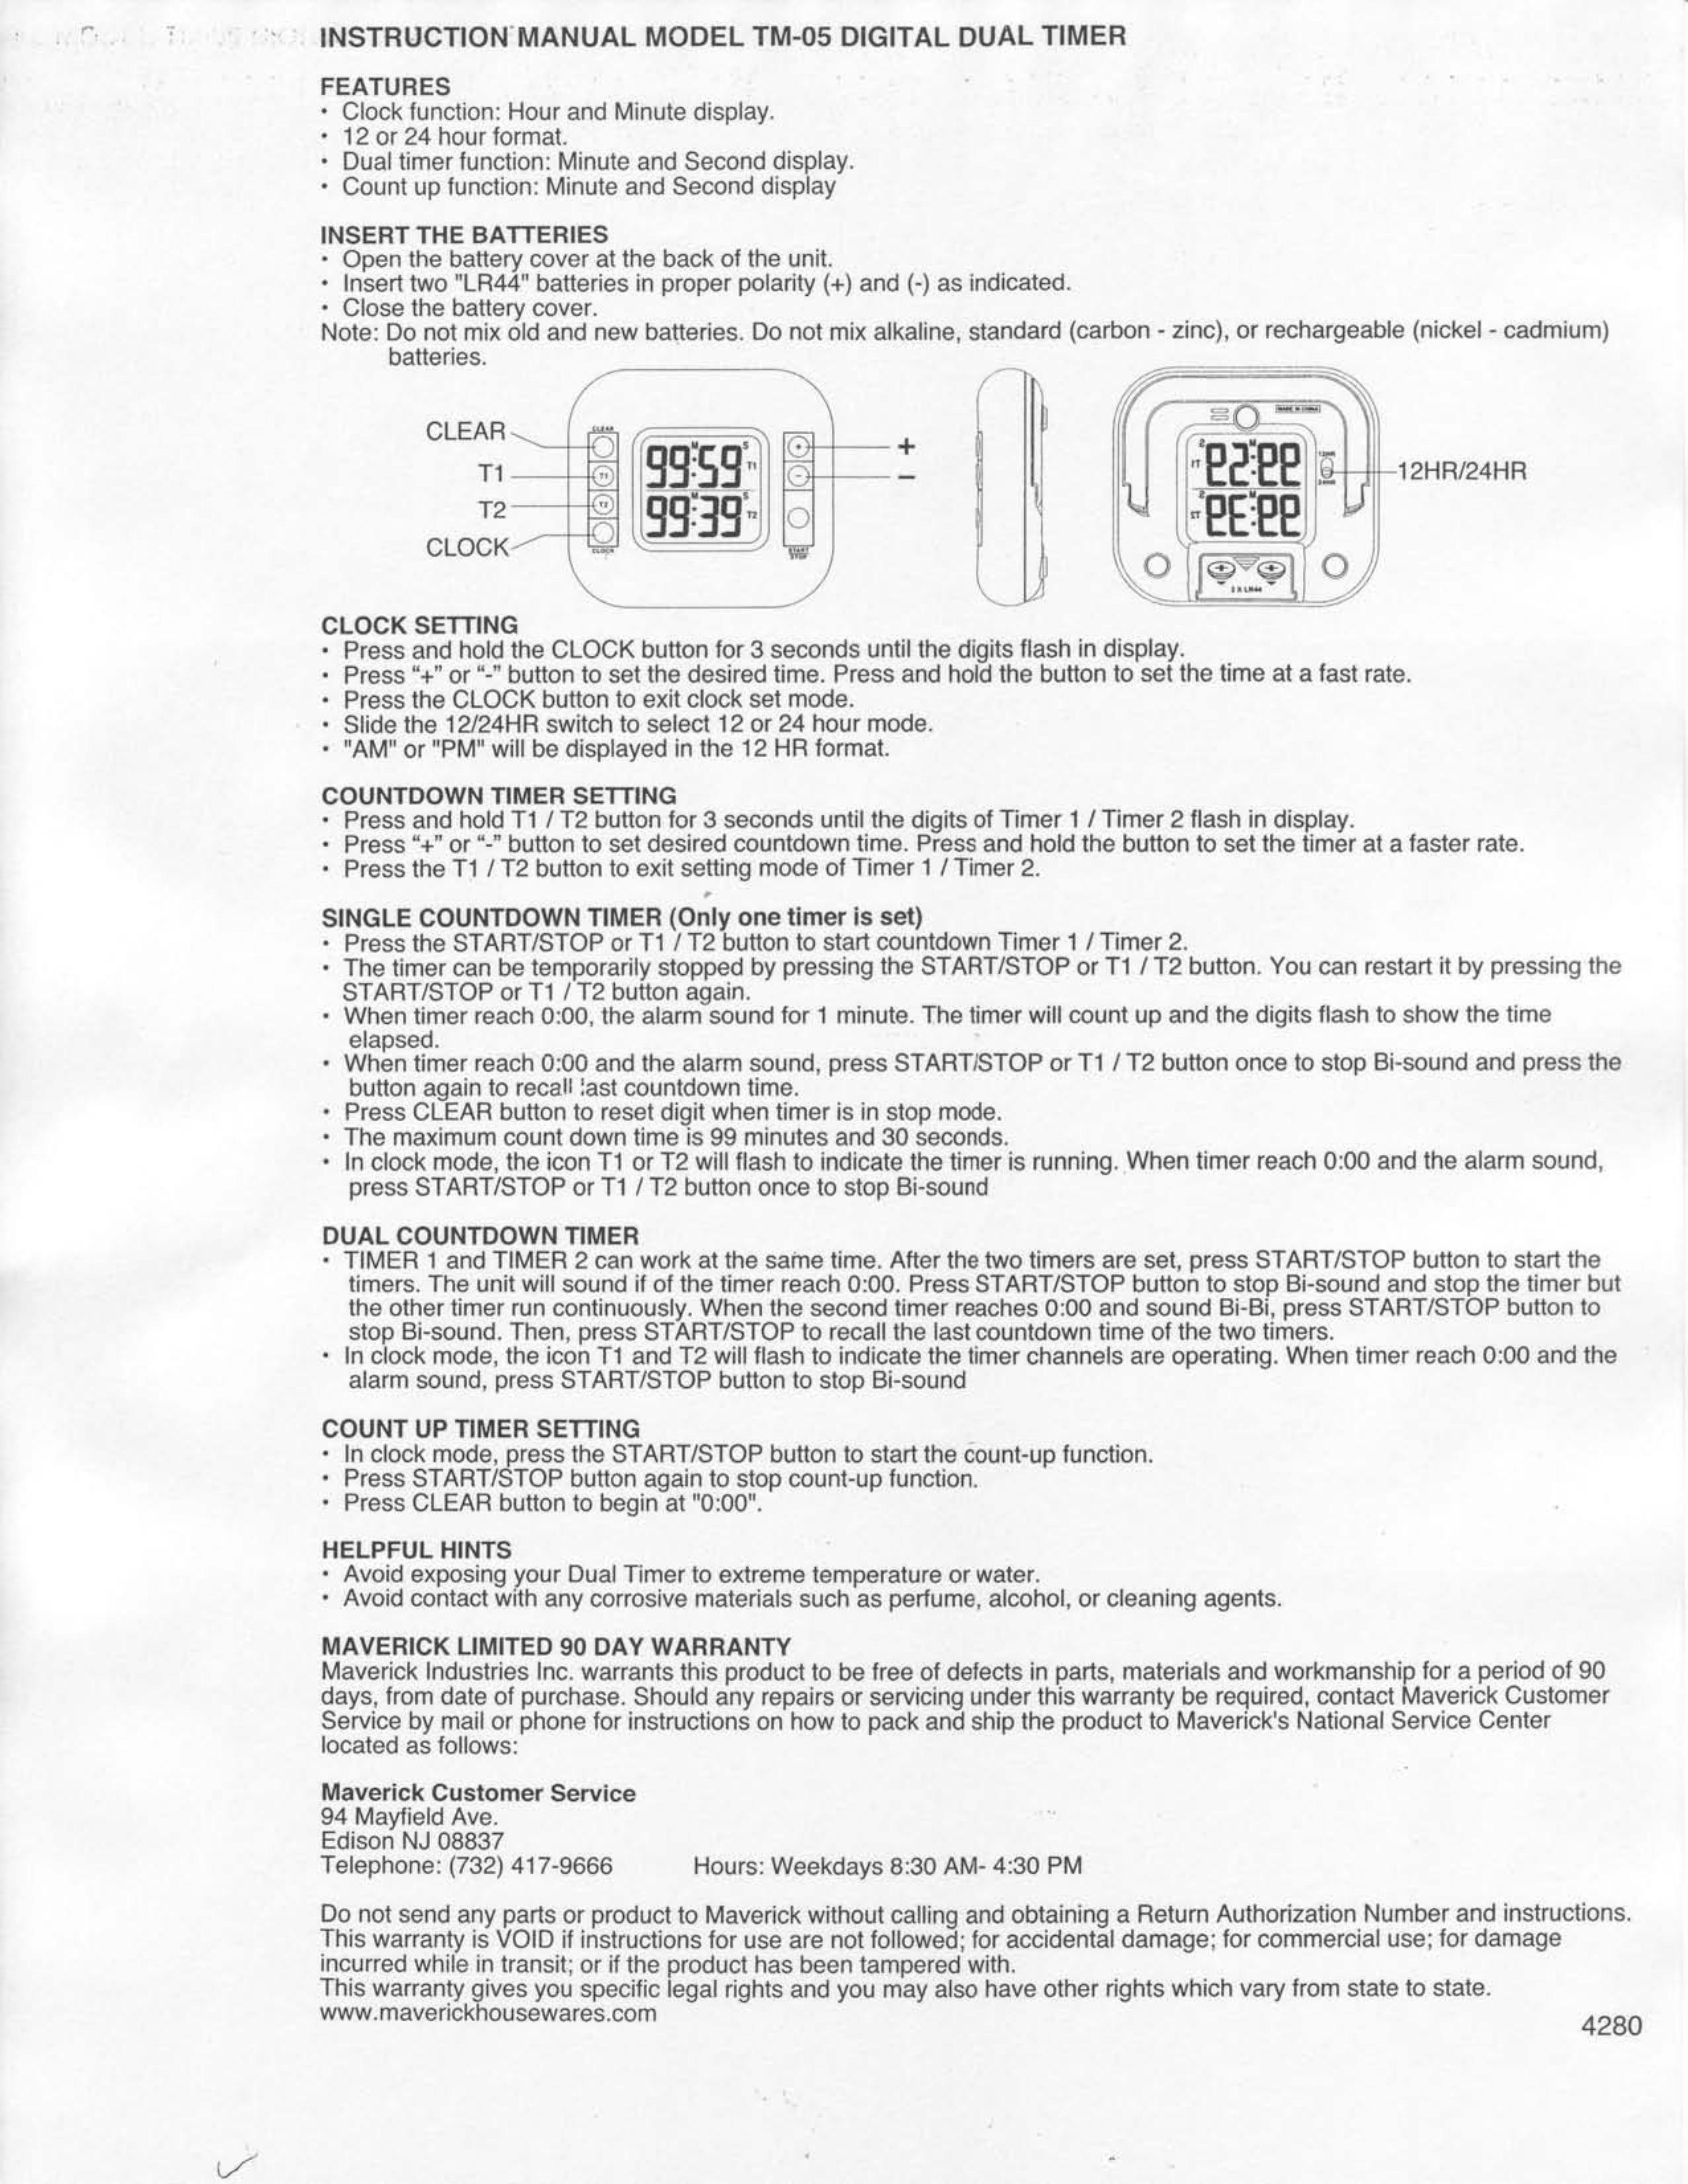 TIMEX Weather Products TM05 Outdoor Timer User Manual